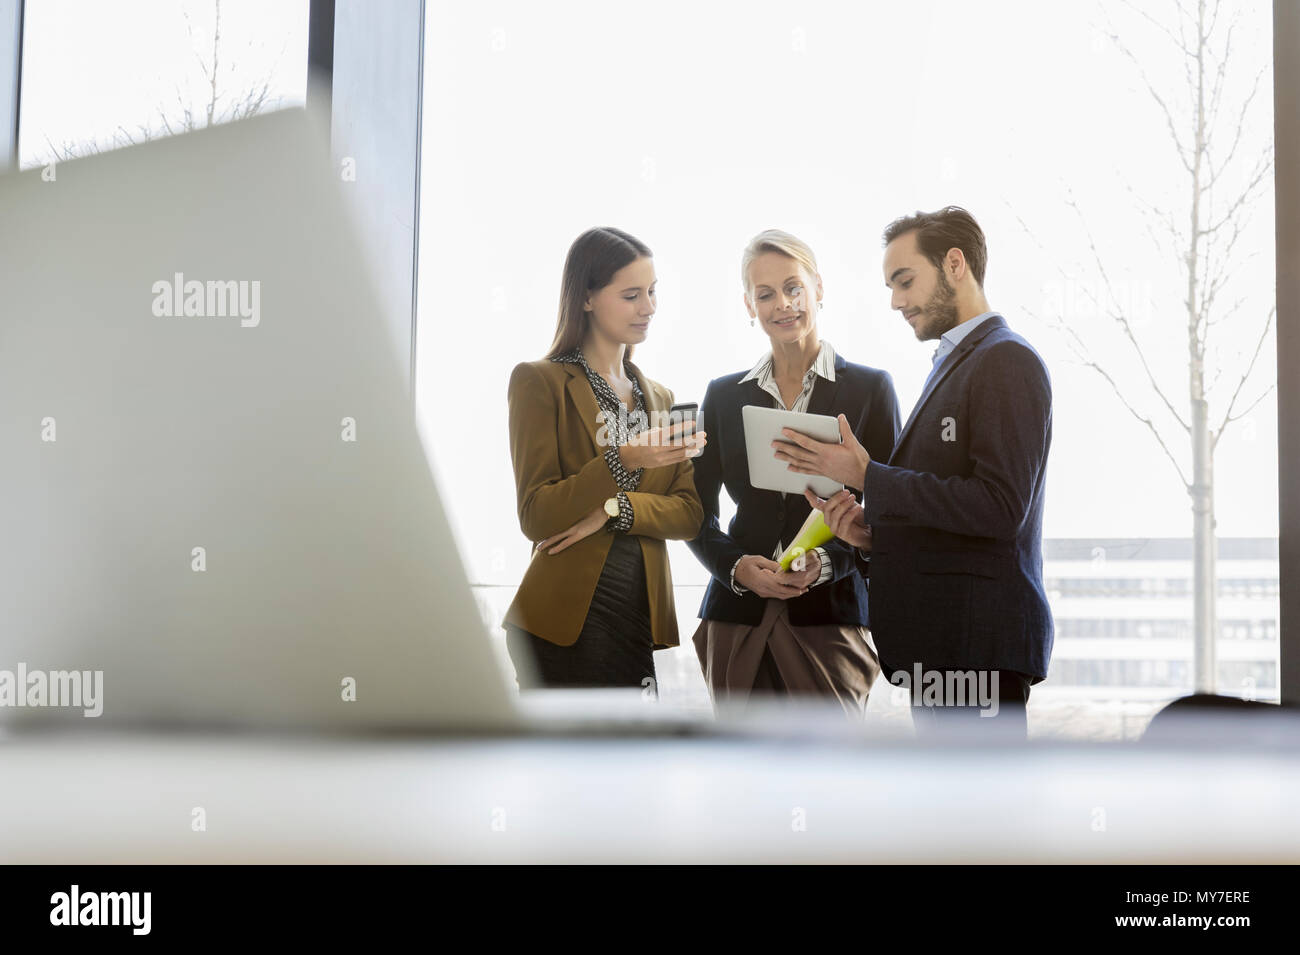 Colleagues chatting using digital tablet Stock Photo